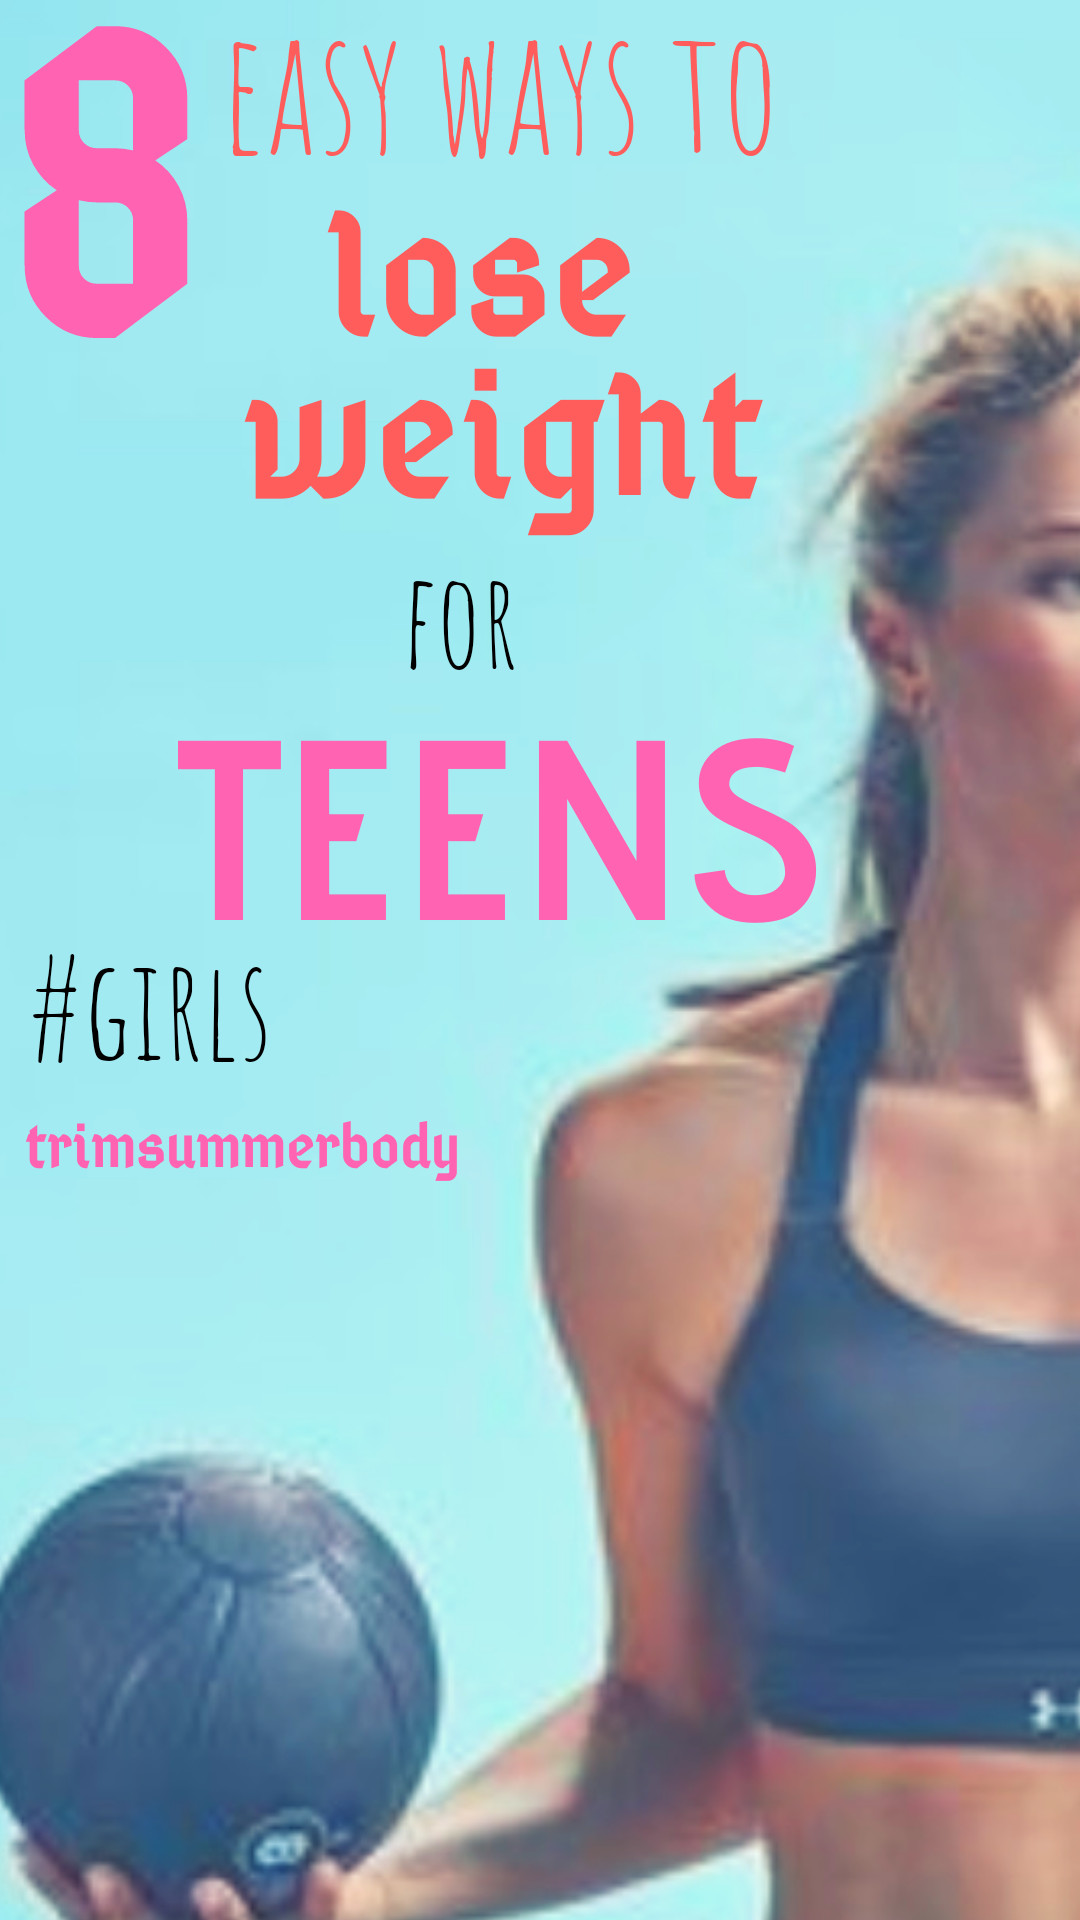 How To Lose Weight In A Week For Teens
 Teens want to know how to lose weight this weight loss